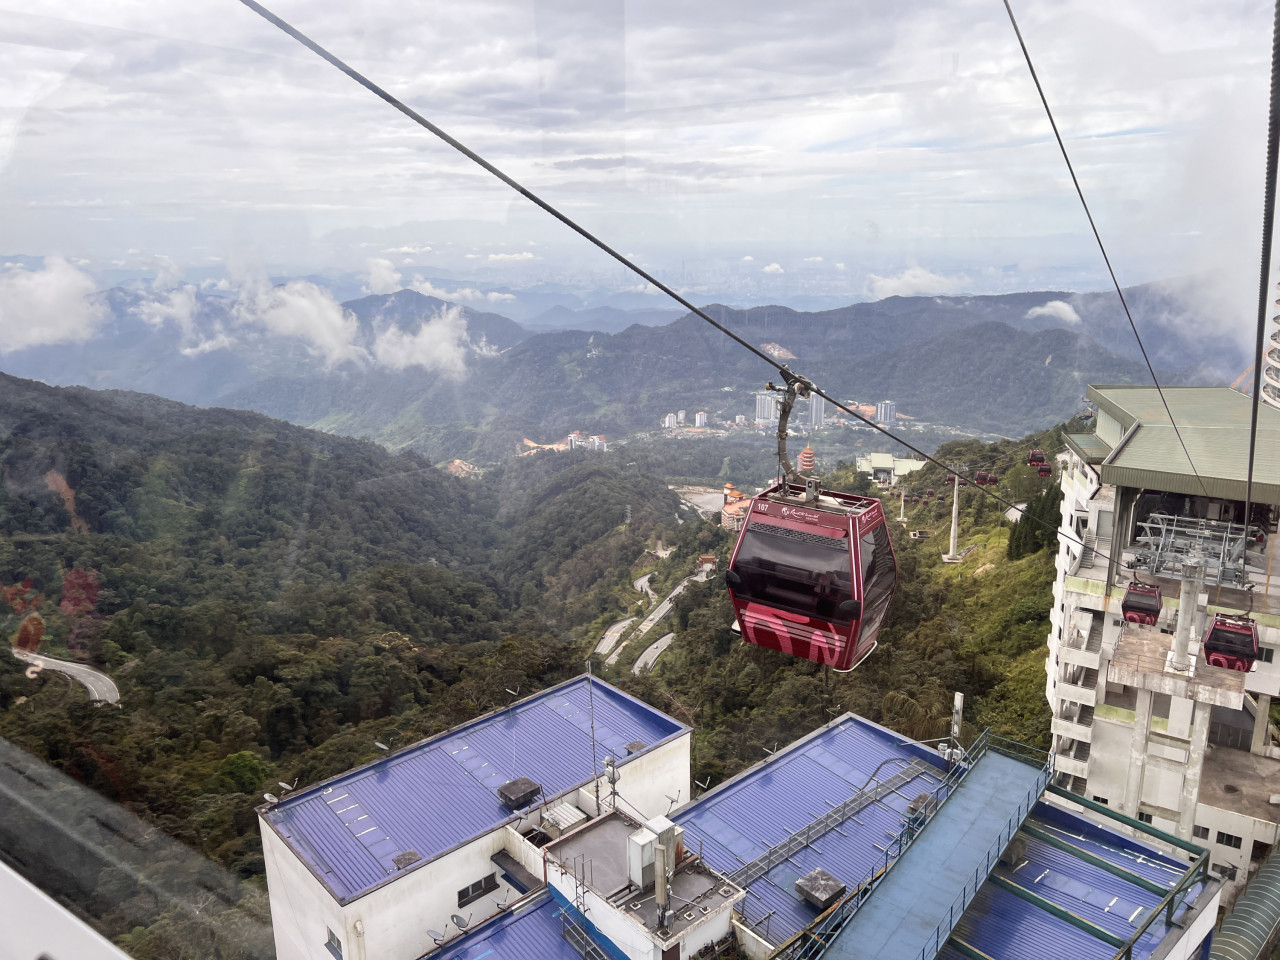 Nothing says Genting Highlands quite like the picturesque views from the cable cars. Just don’t look down too much. – Haikal Fernandez pic